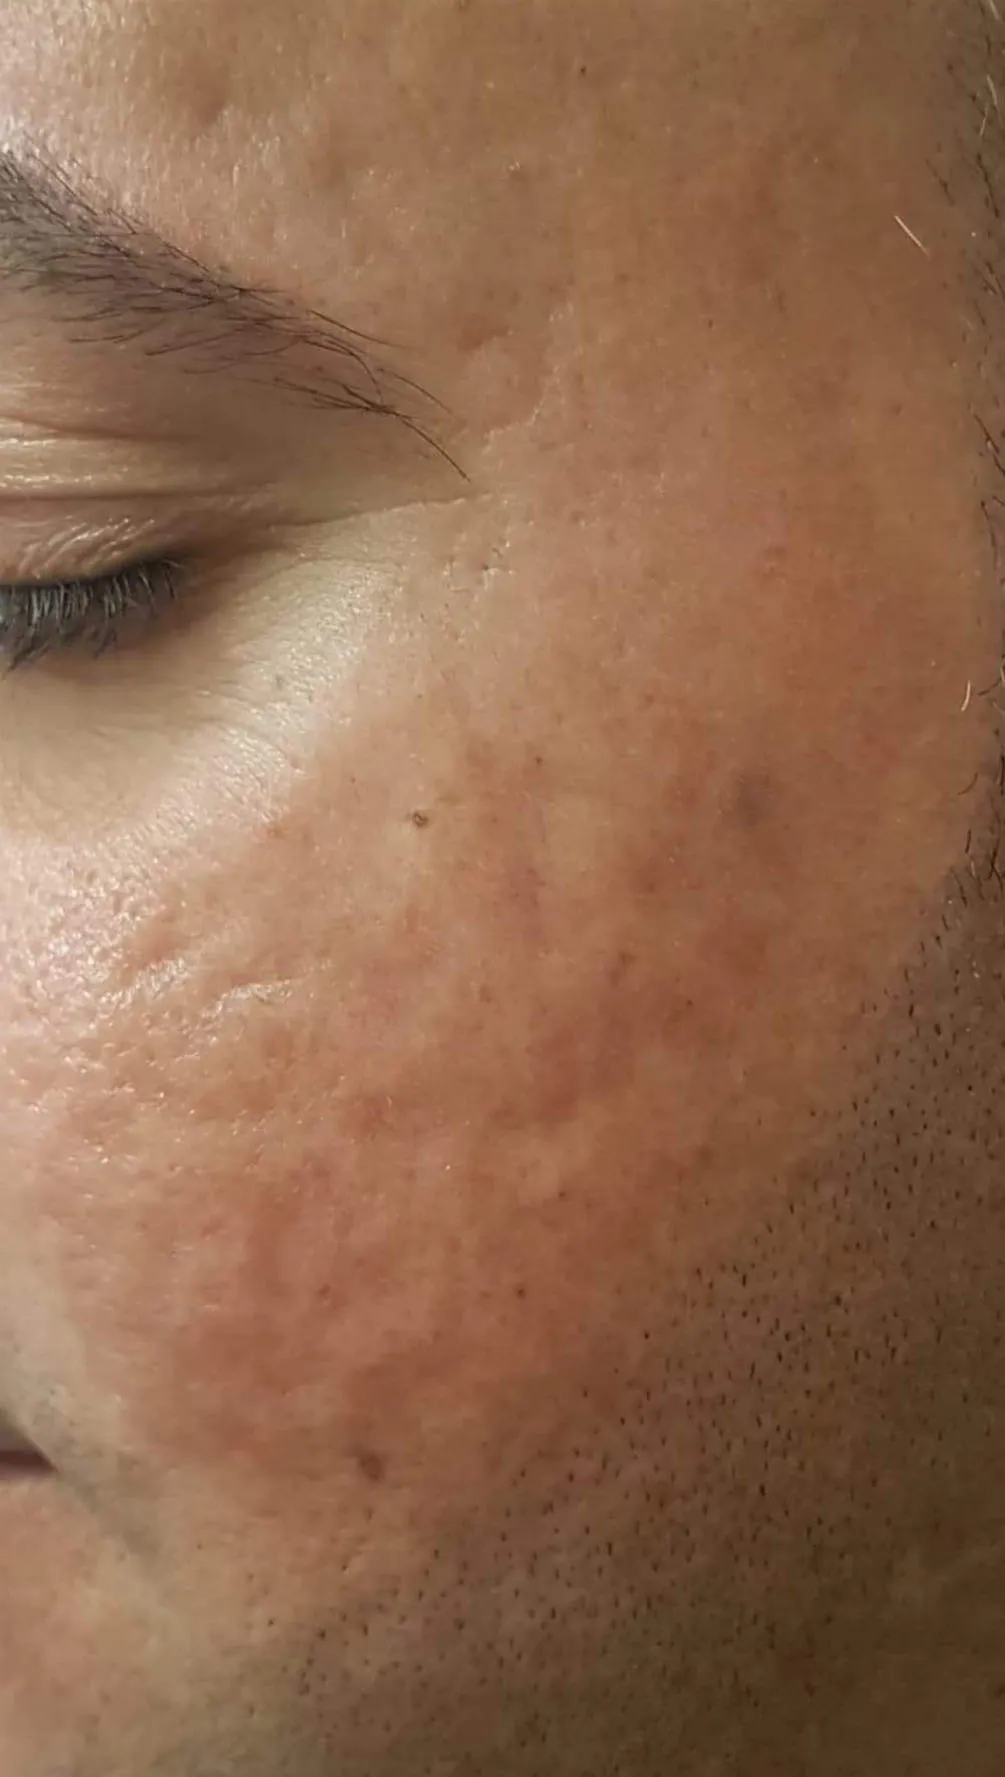 02_Fractional-co2-Laser-Deep-Acne-Scar-and-Pigmentation-Reduction_Before